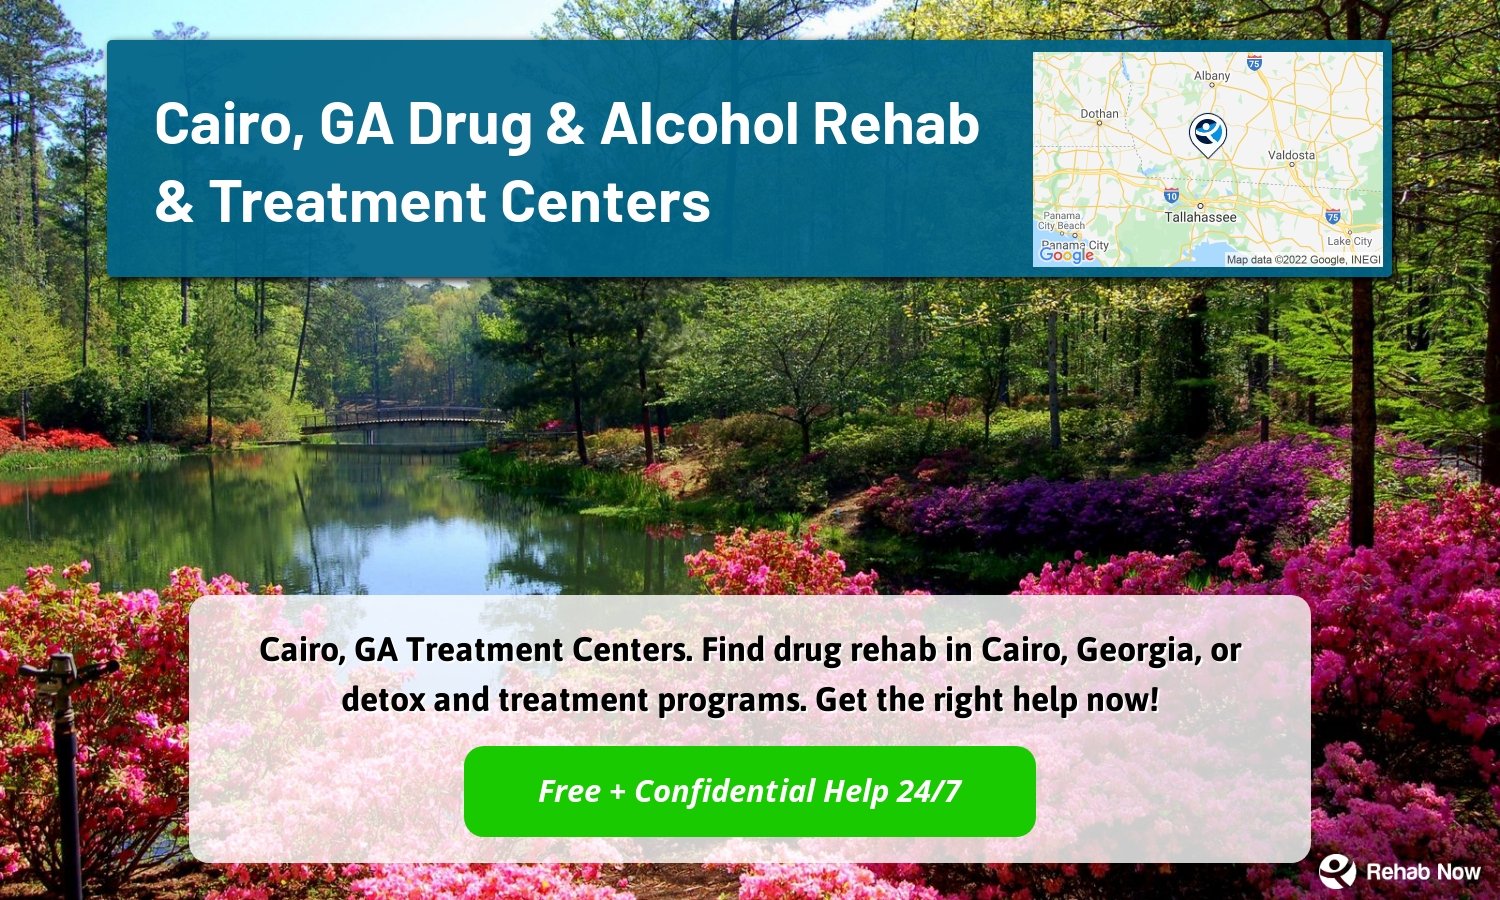 Cairo, GA Treatment Centers. Find drug rehab in Cairo, Georgia, or detox and treatment programs. Get the right help now!